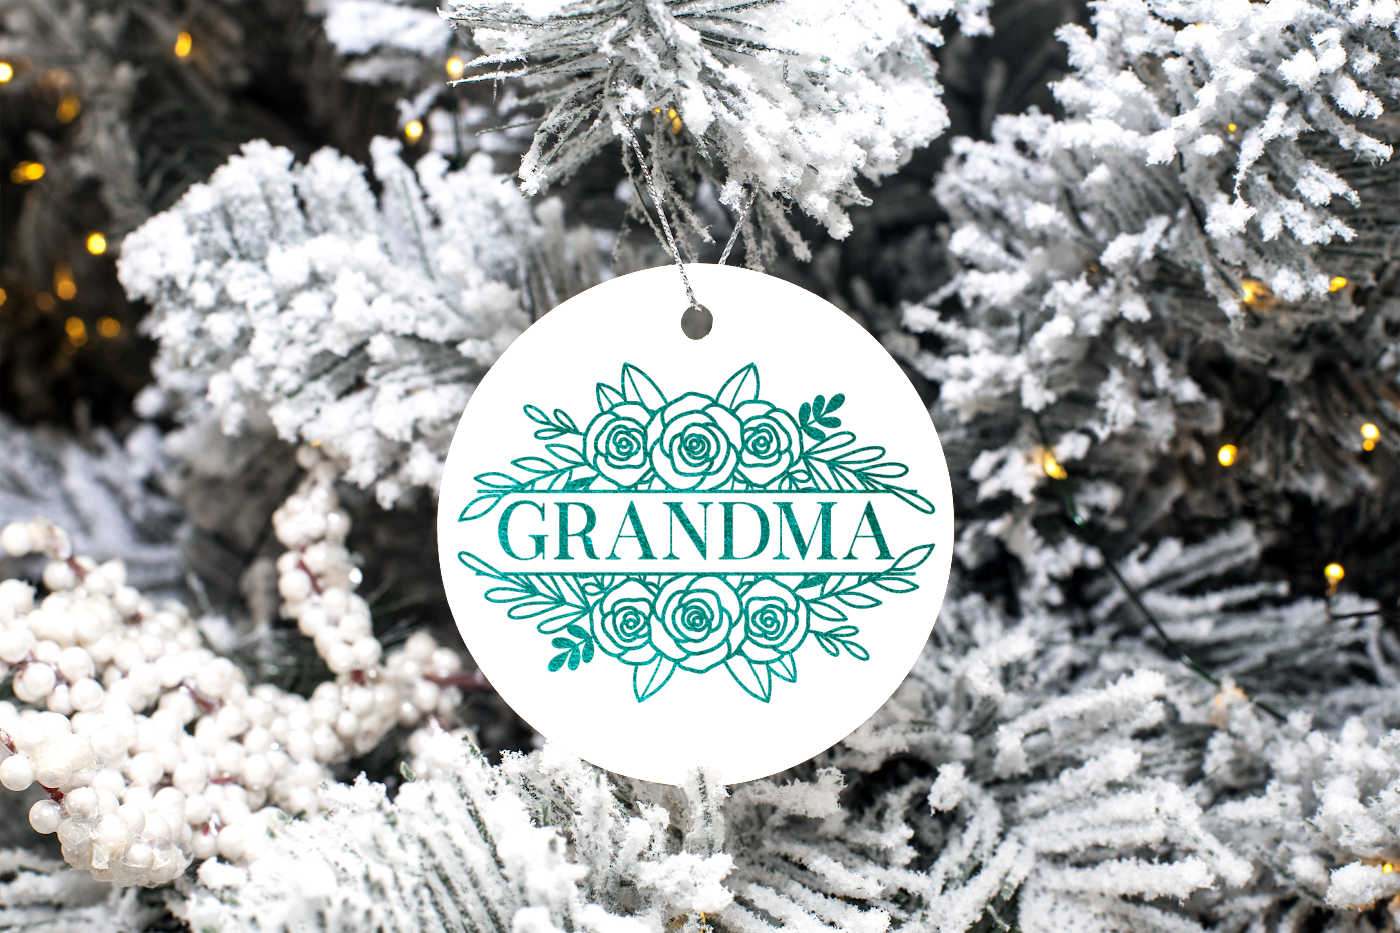 A floral name SVG on a white circle ornament hanging from a flocked tree.